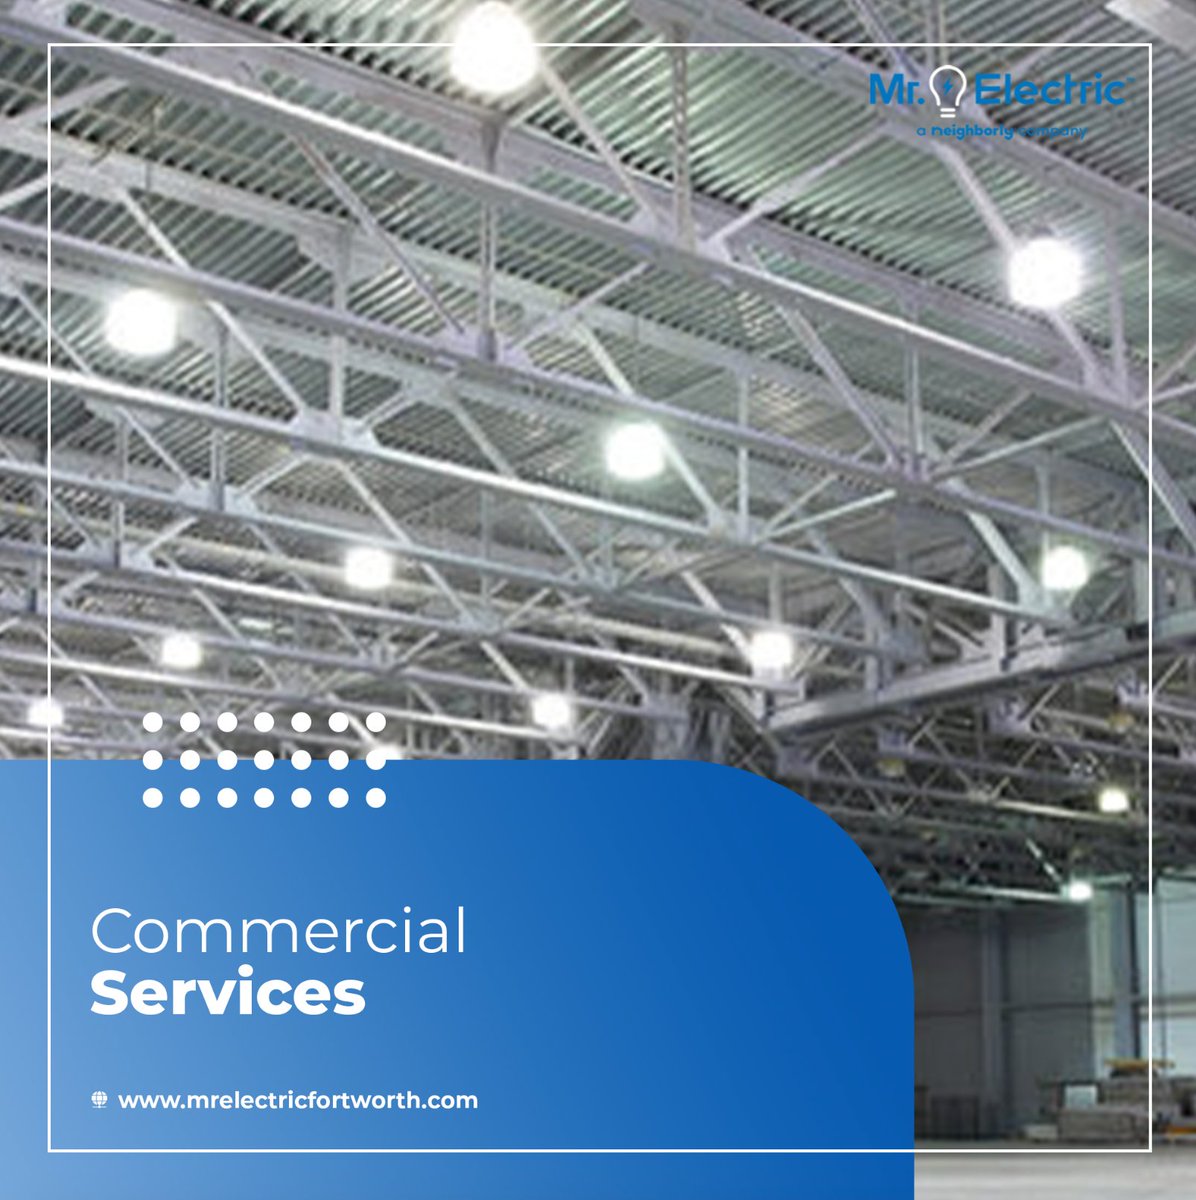 Modern Electrical Trends In Commercial Construction

In the realm of commercial construction, electrical systems are the lifeblood that powers businesses and facilitates seamless operations. There has never been a greater need for effective...

mrelectricfortworth.com/modern-electri…